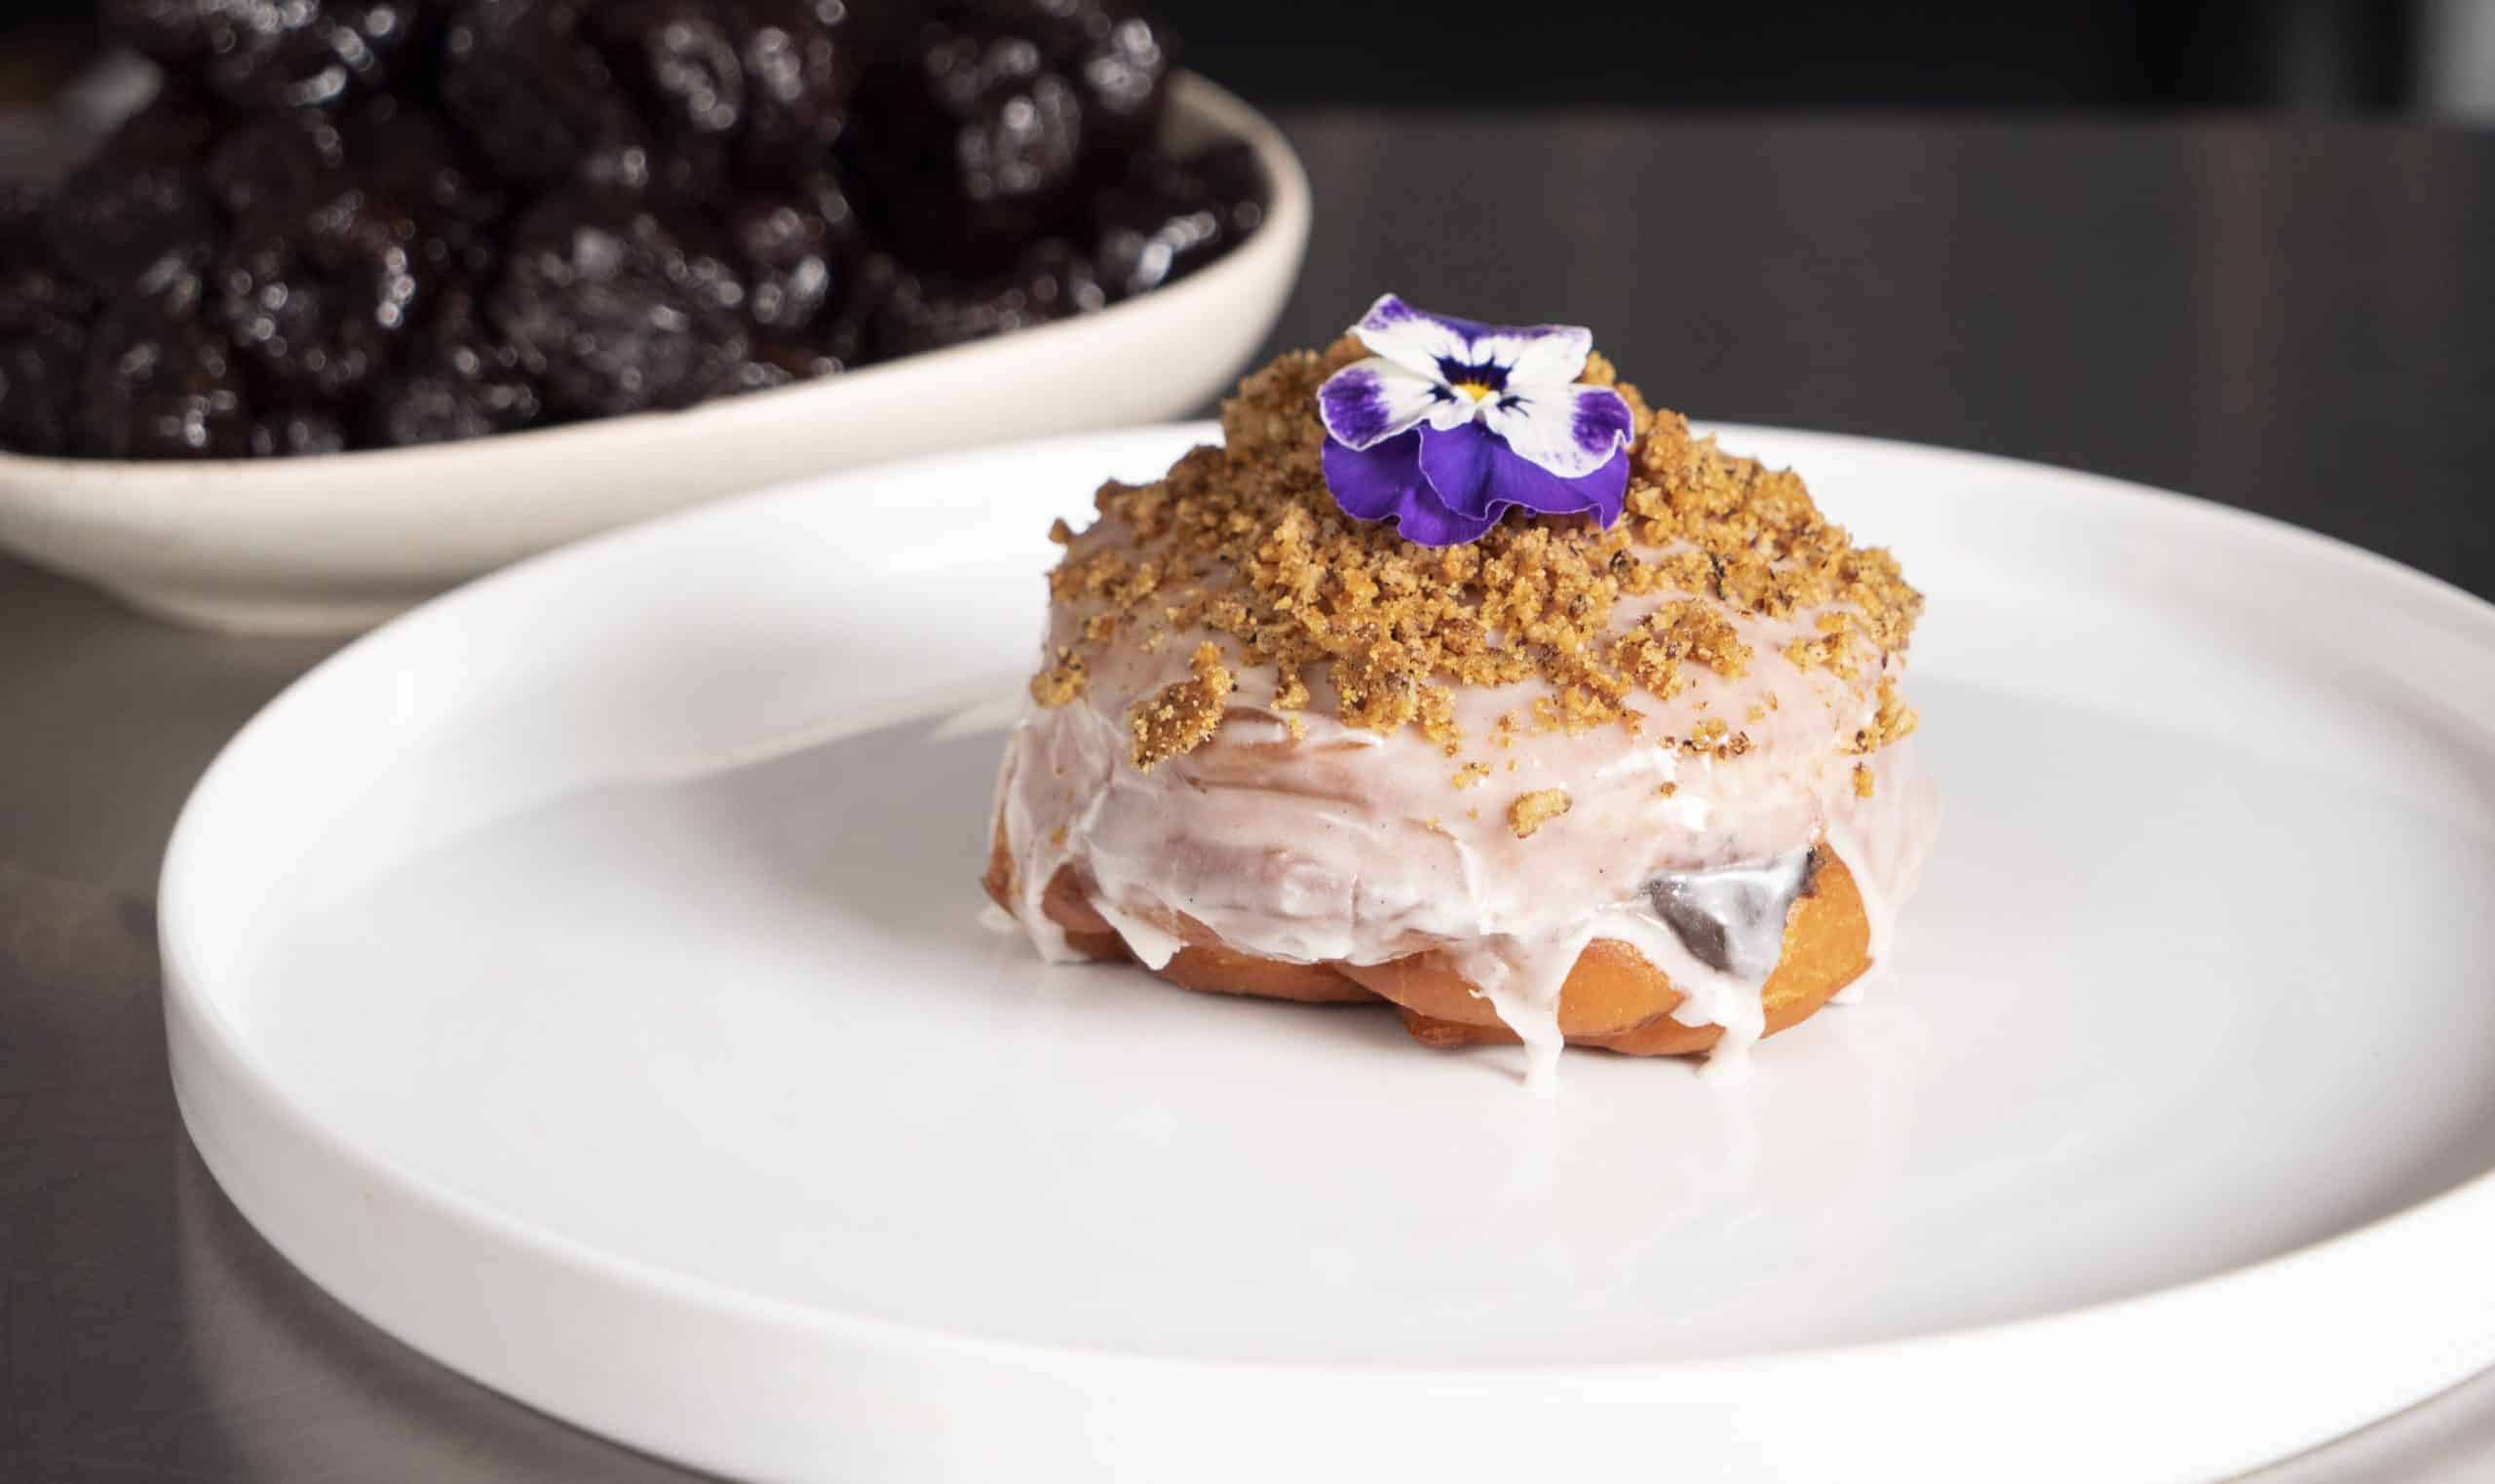 a glazed Jelly Donut with California Prunes on a plate and topped with an edible flower